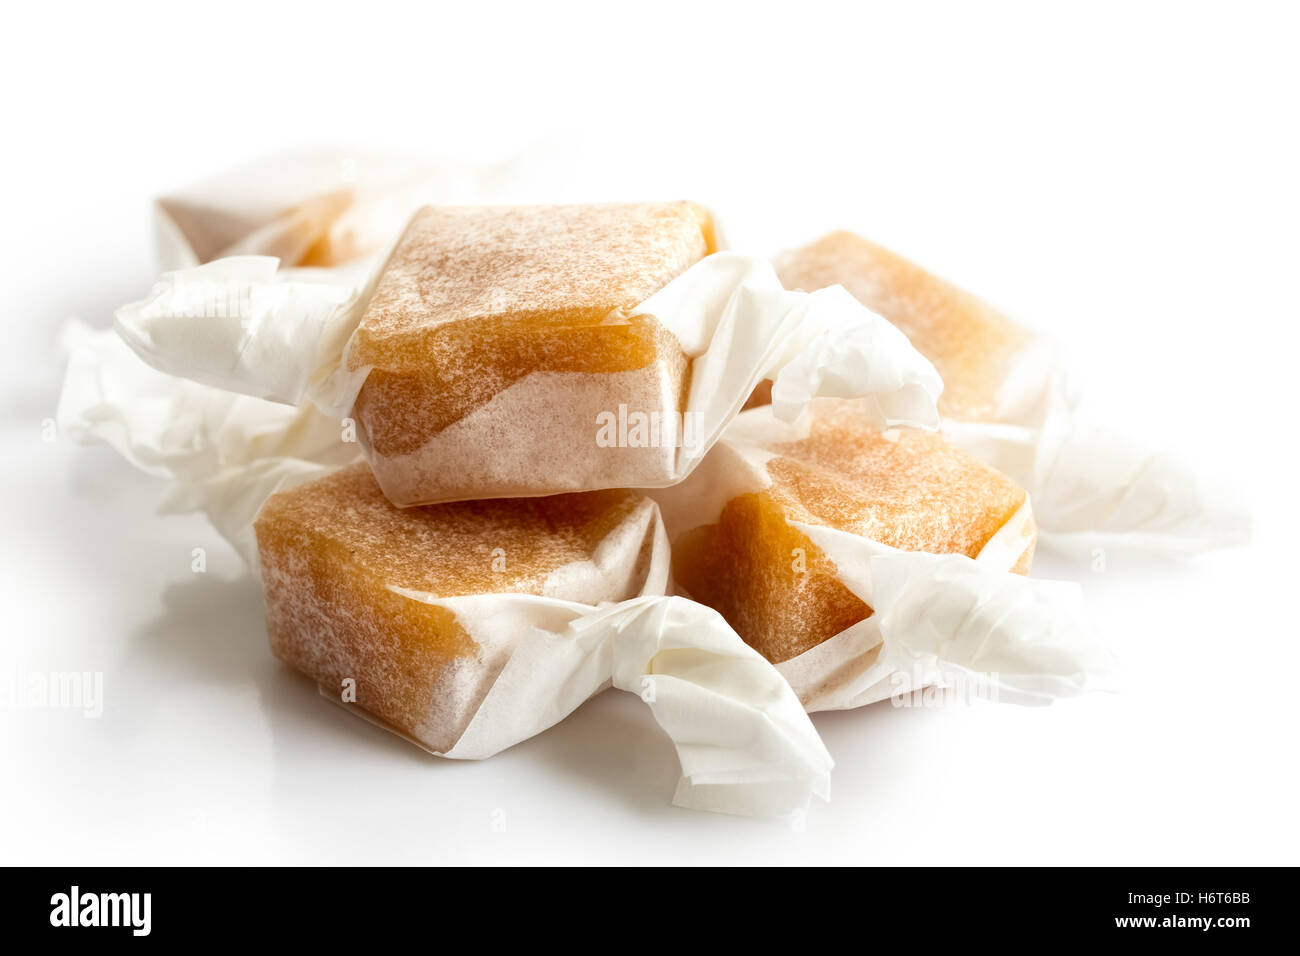 Pile of luxury wrapped caramel toffees isolated on white in perspective. Stock Photo